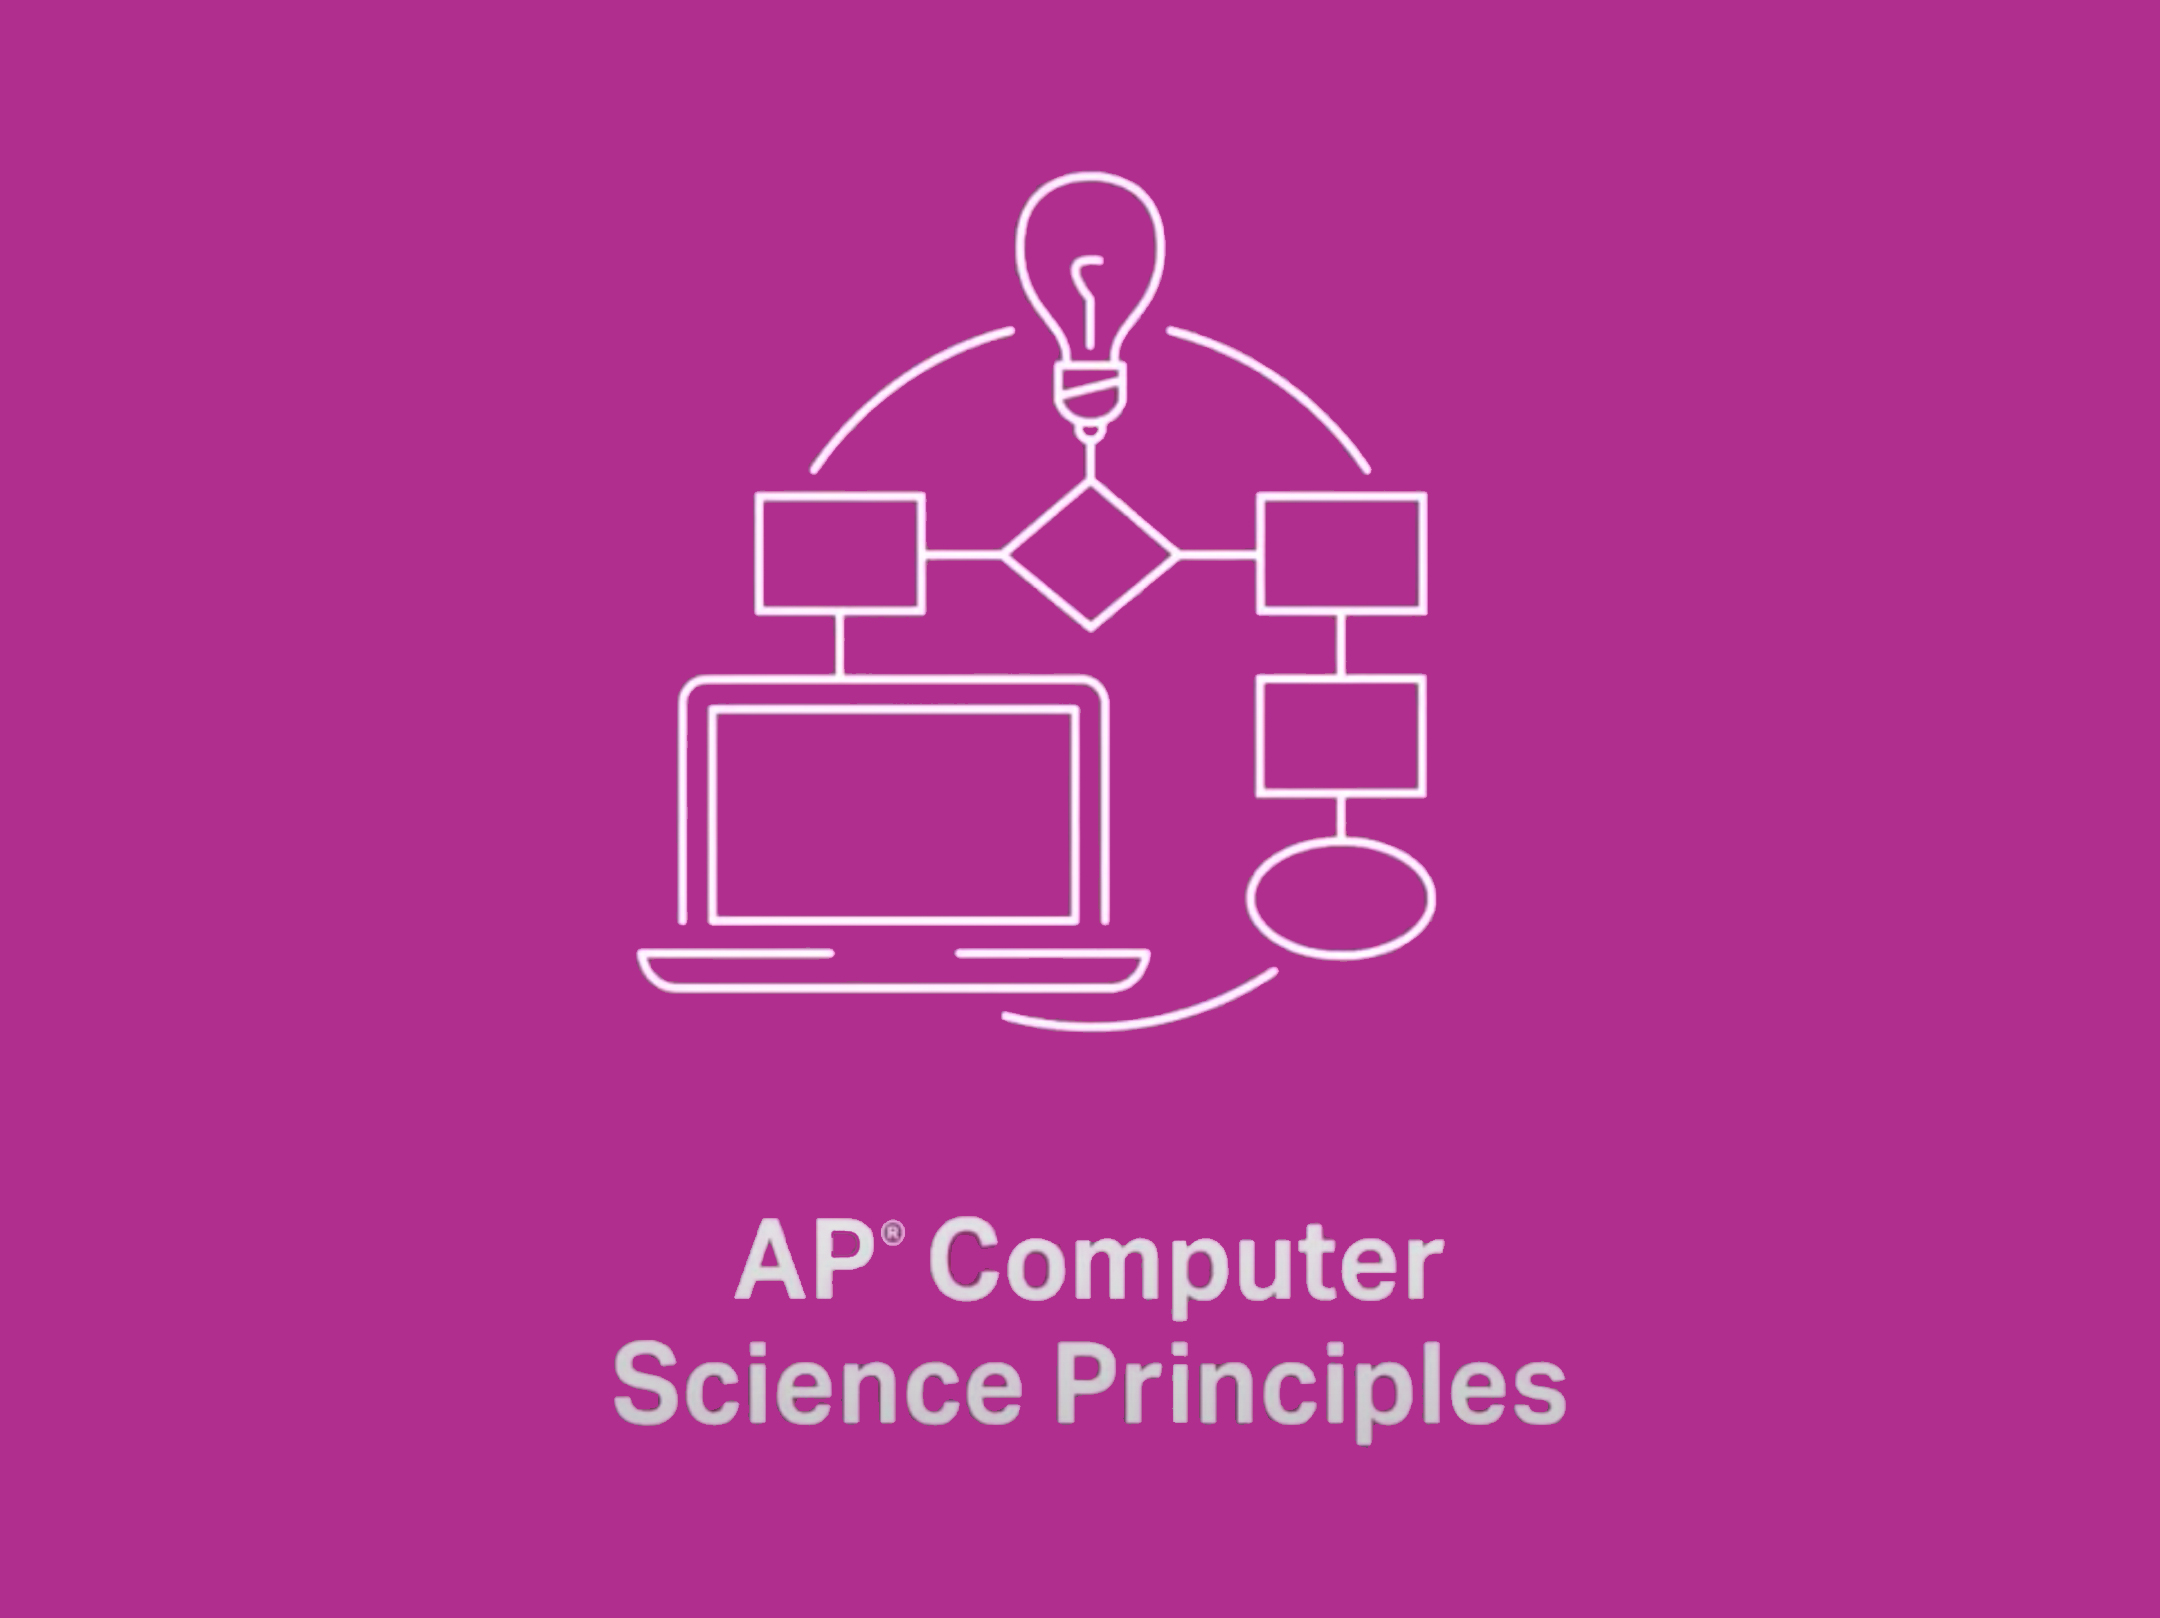 white icon representing ap computer science principles on a magenta background